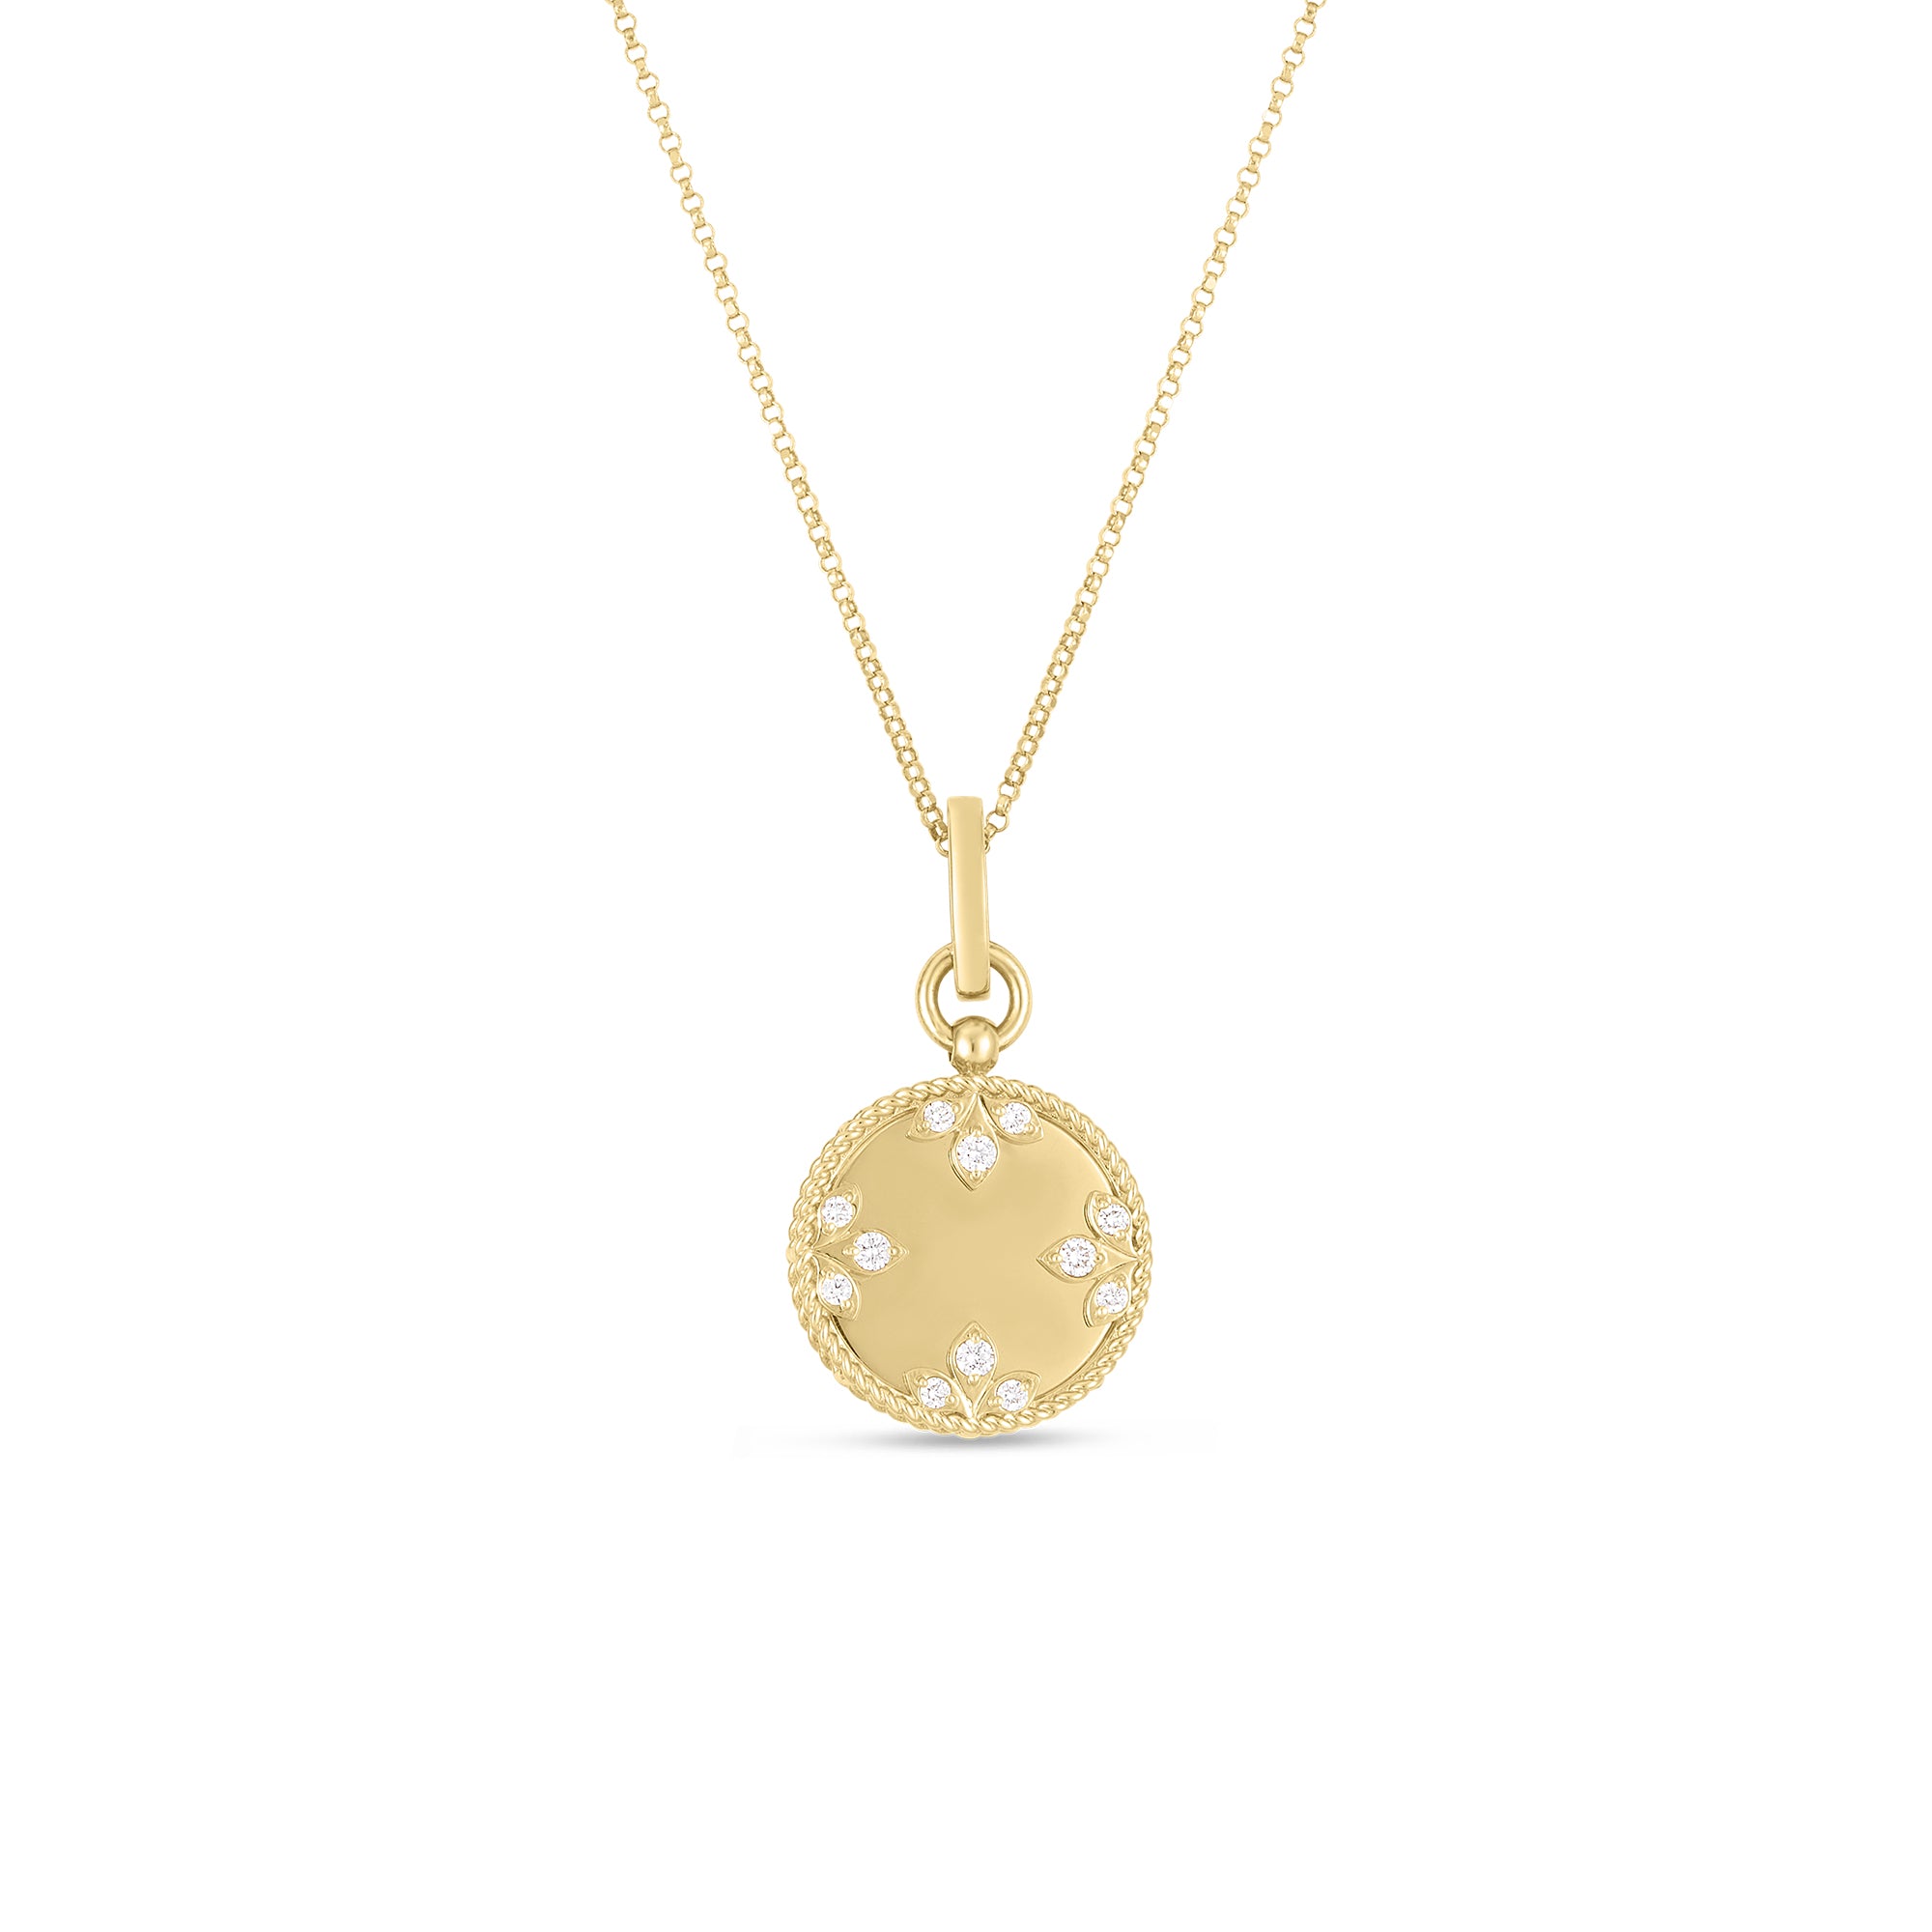 18K YELLOW GOLD MEDALLION CHARMS SMALL DIAMOND NECKLACE